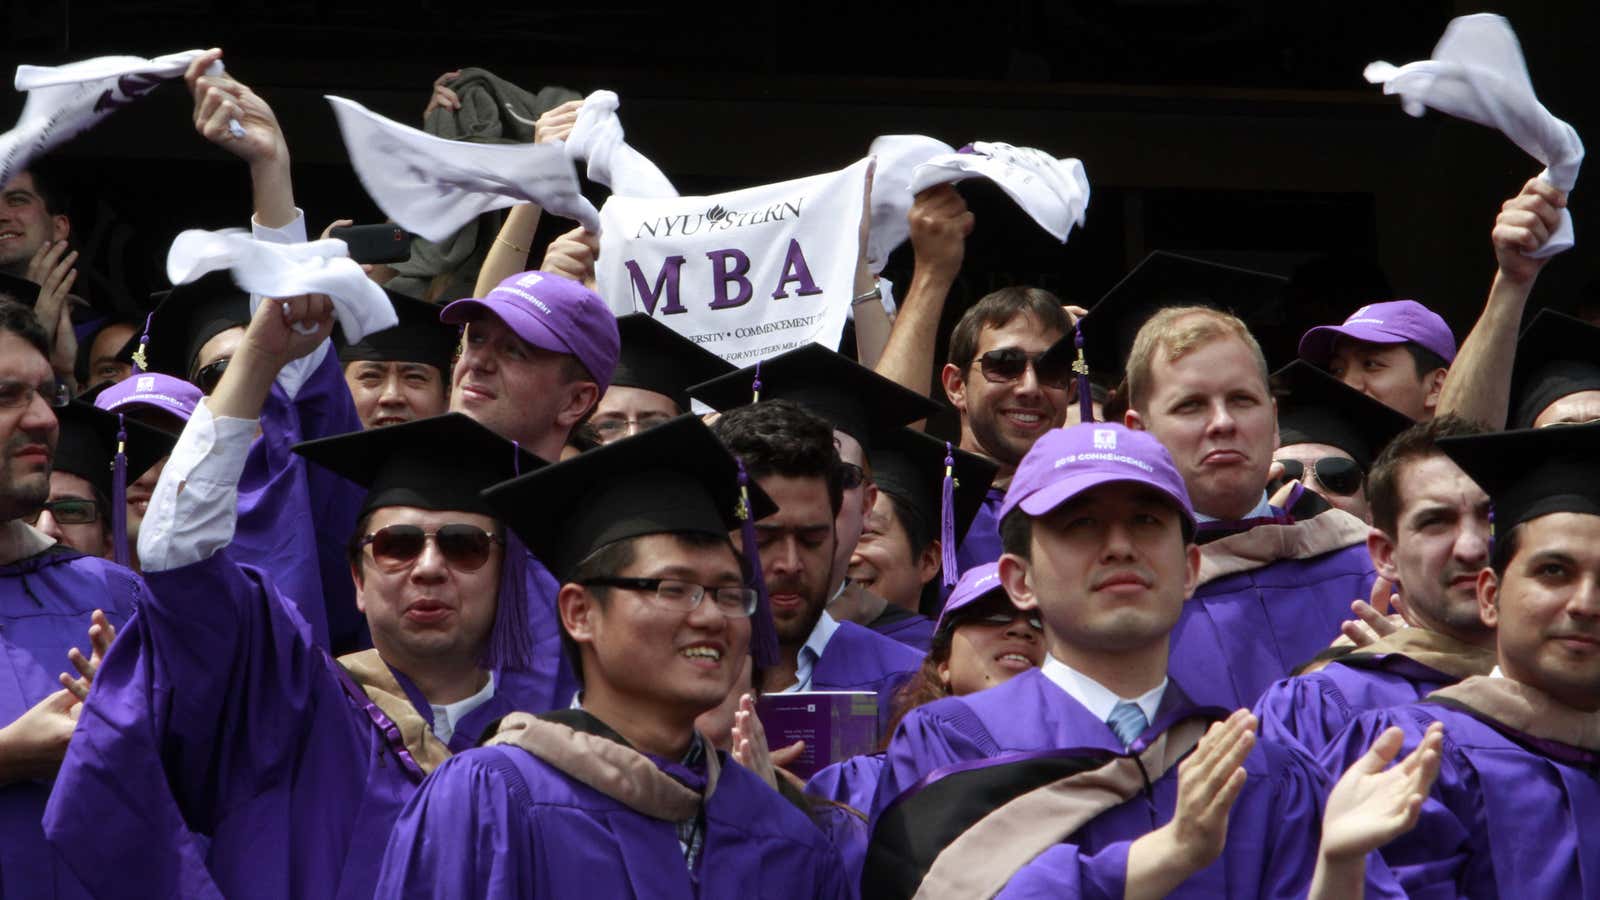 Shocking: Getting an MBA can really help your future earnings.